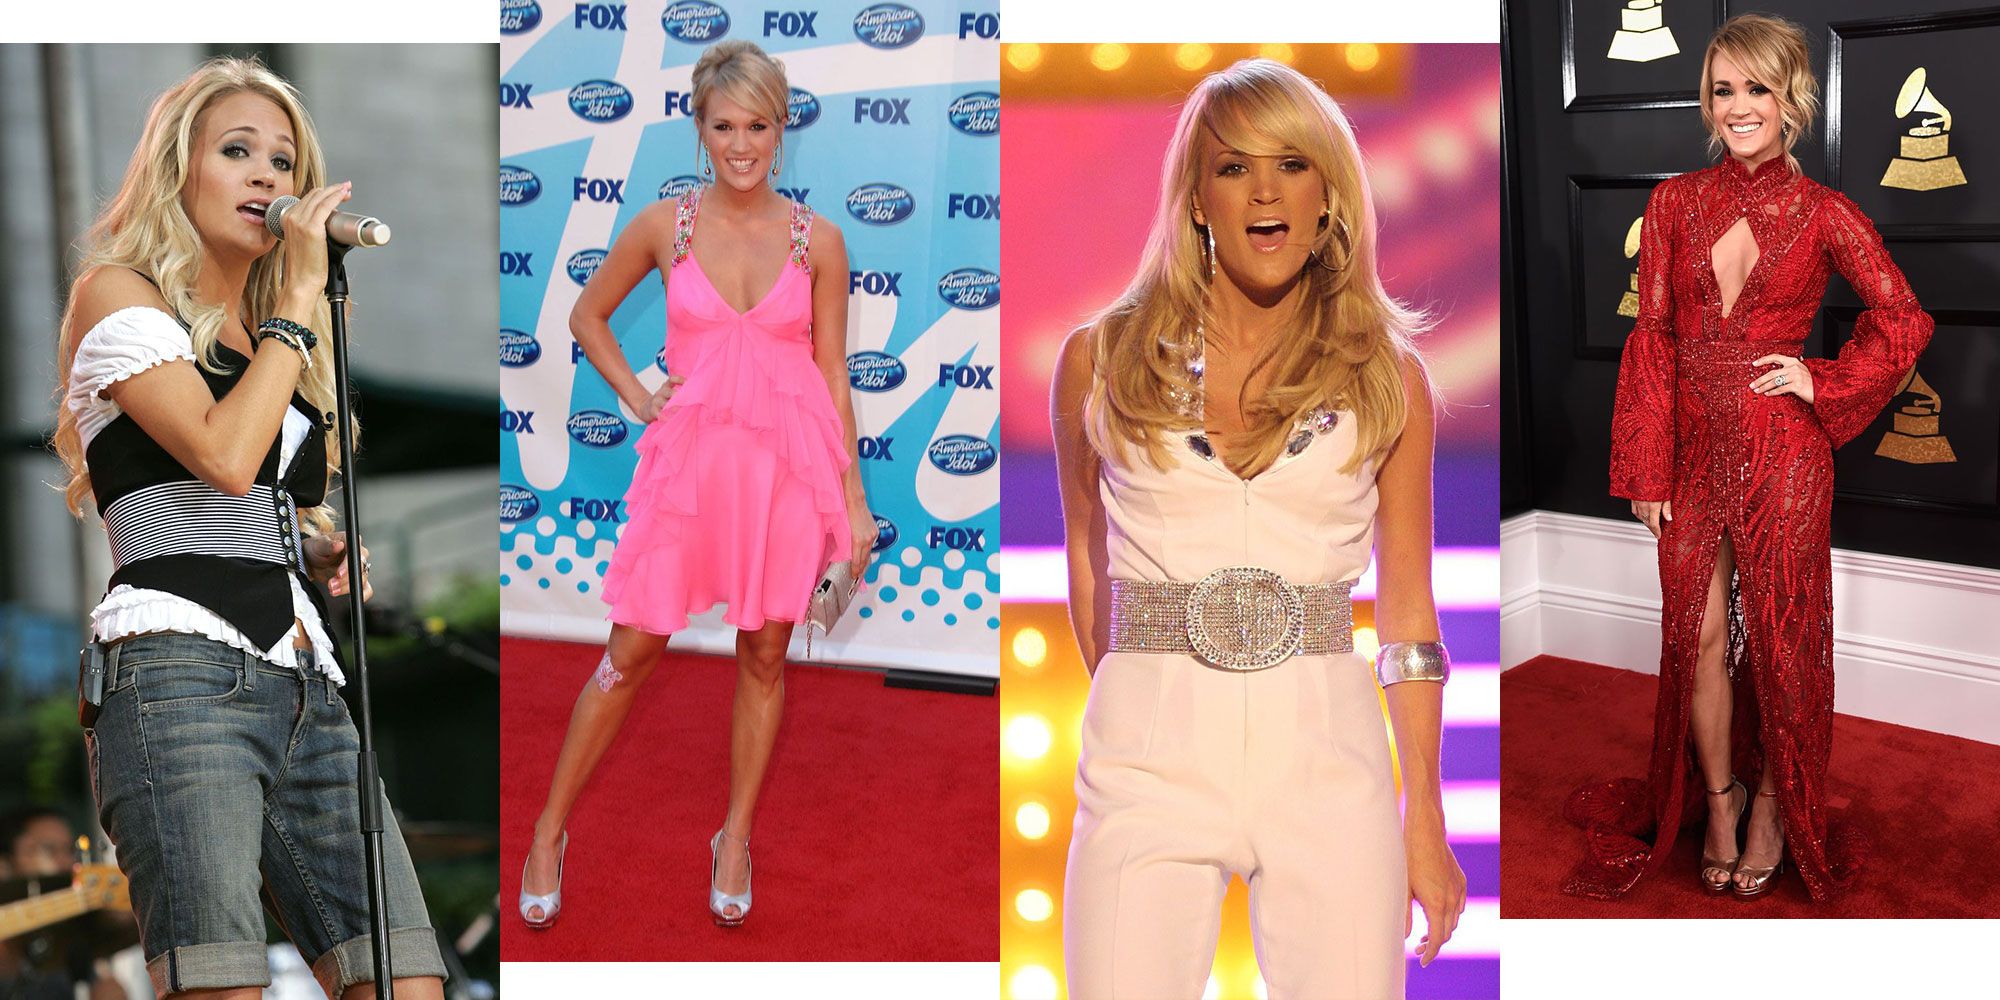 Carrie Underwood Nude Porn - Carrie Underwood Style Evolution - 40 Photos Showing Carrie Underwood's  Transformation